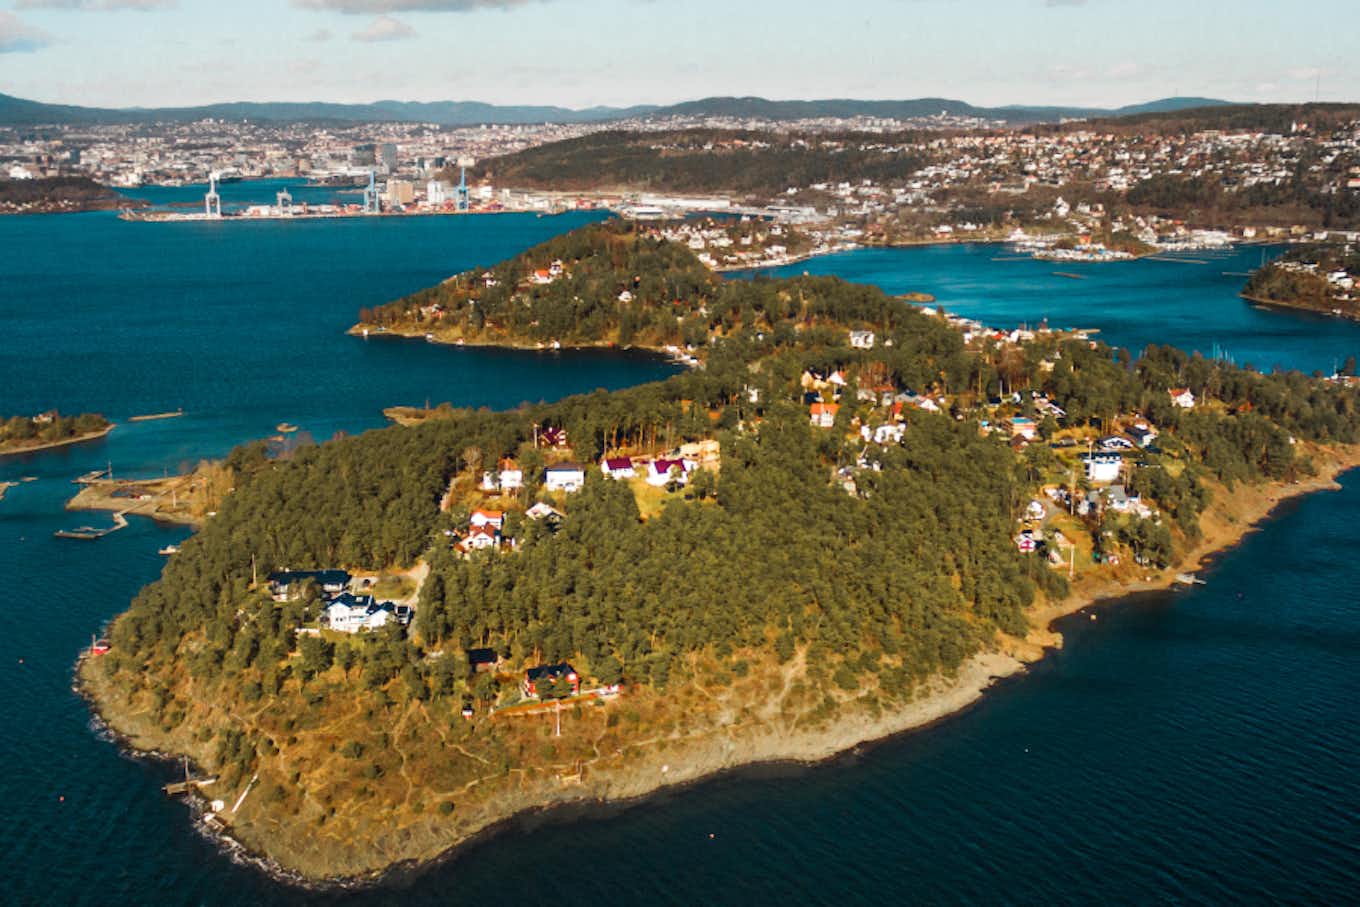 View of Oslo ports, small island in the bay of Oslo